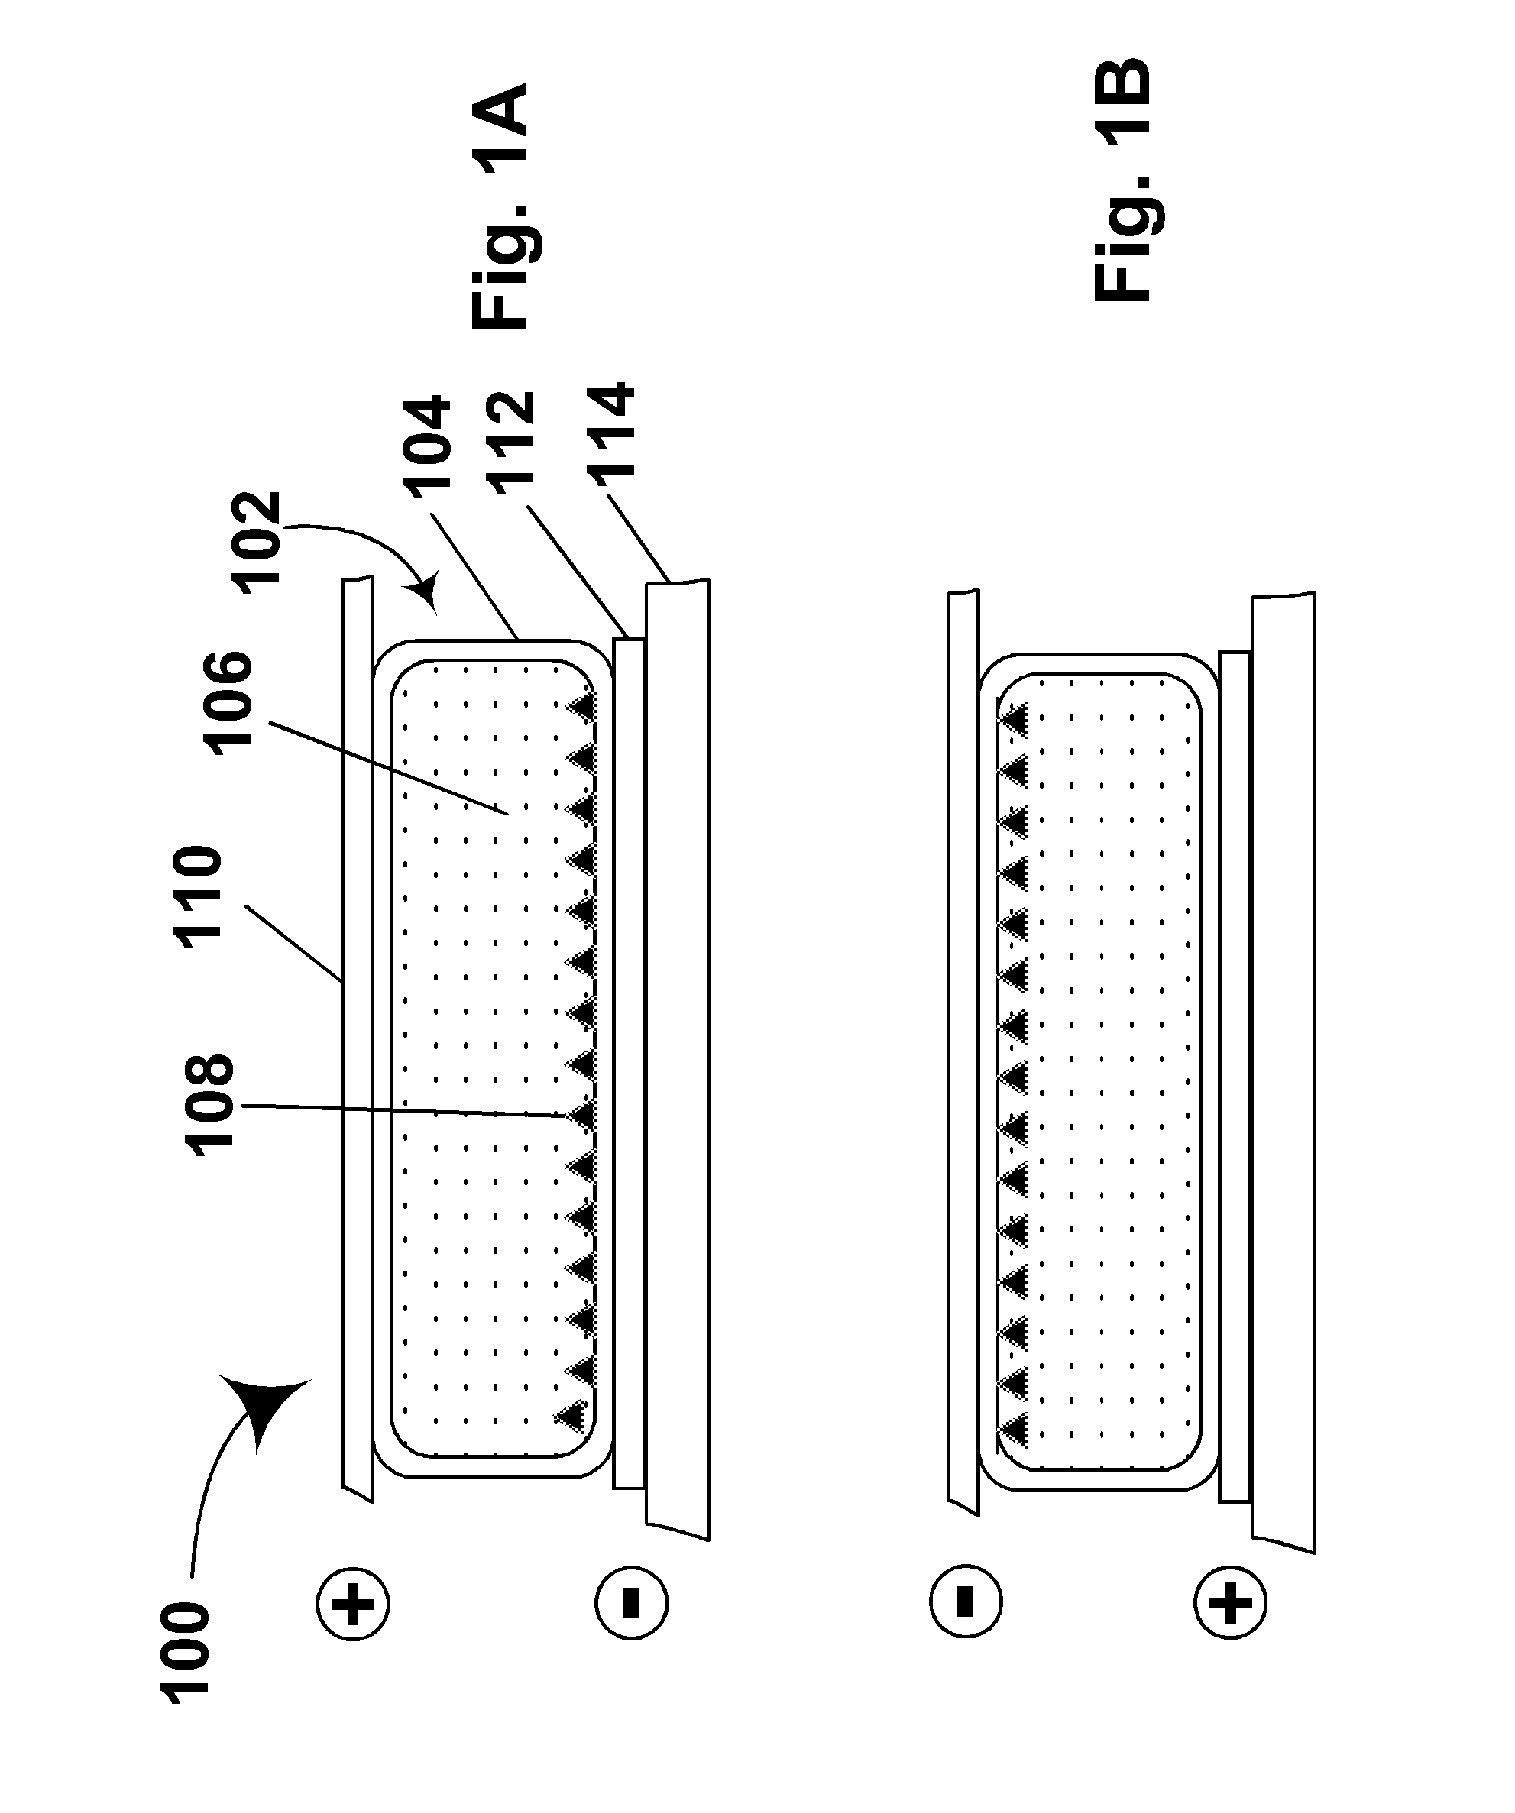 Materials for use in electrophoretic displays